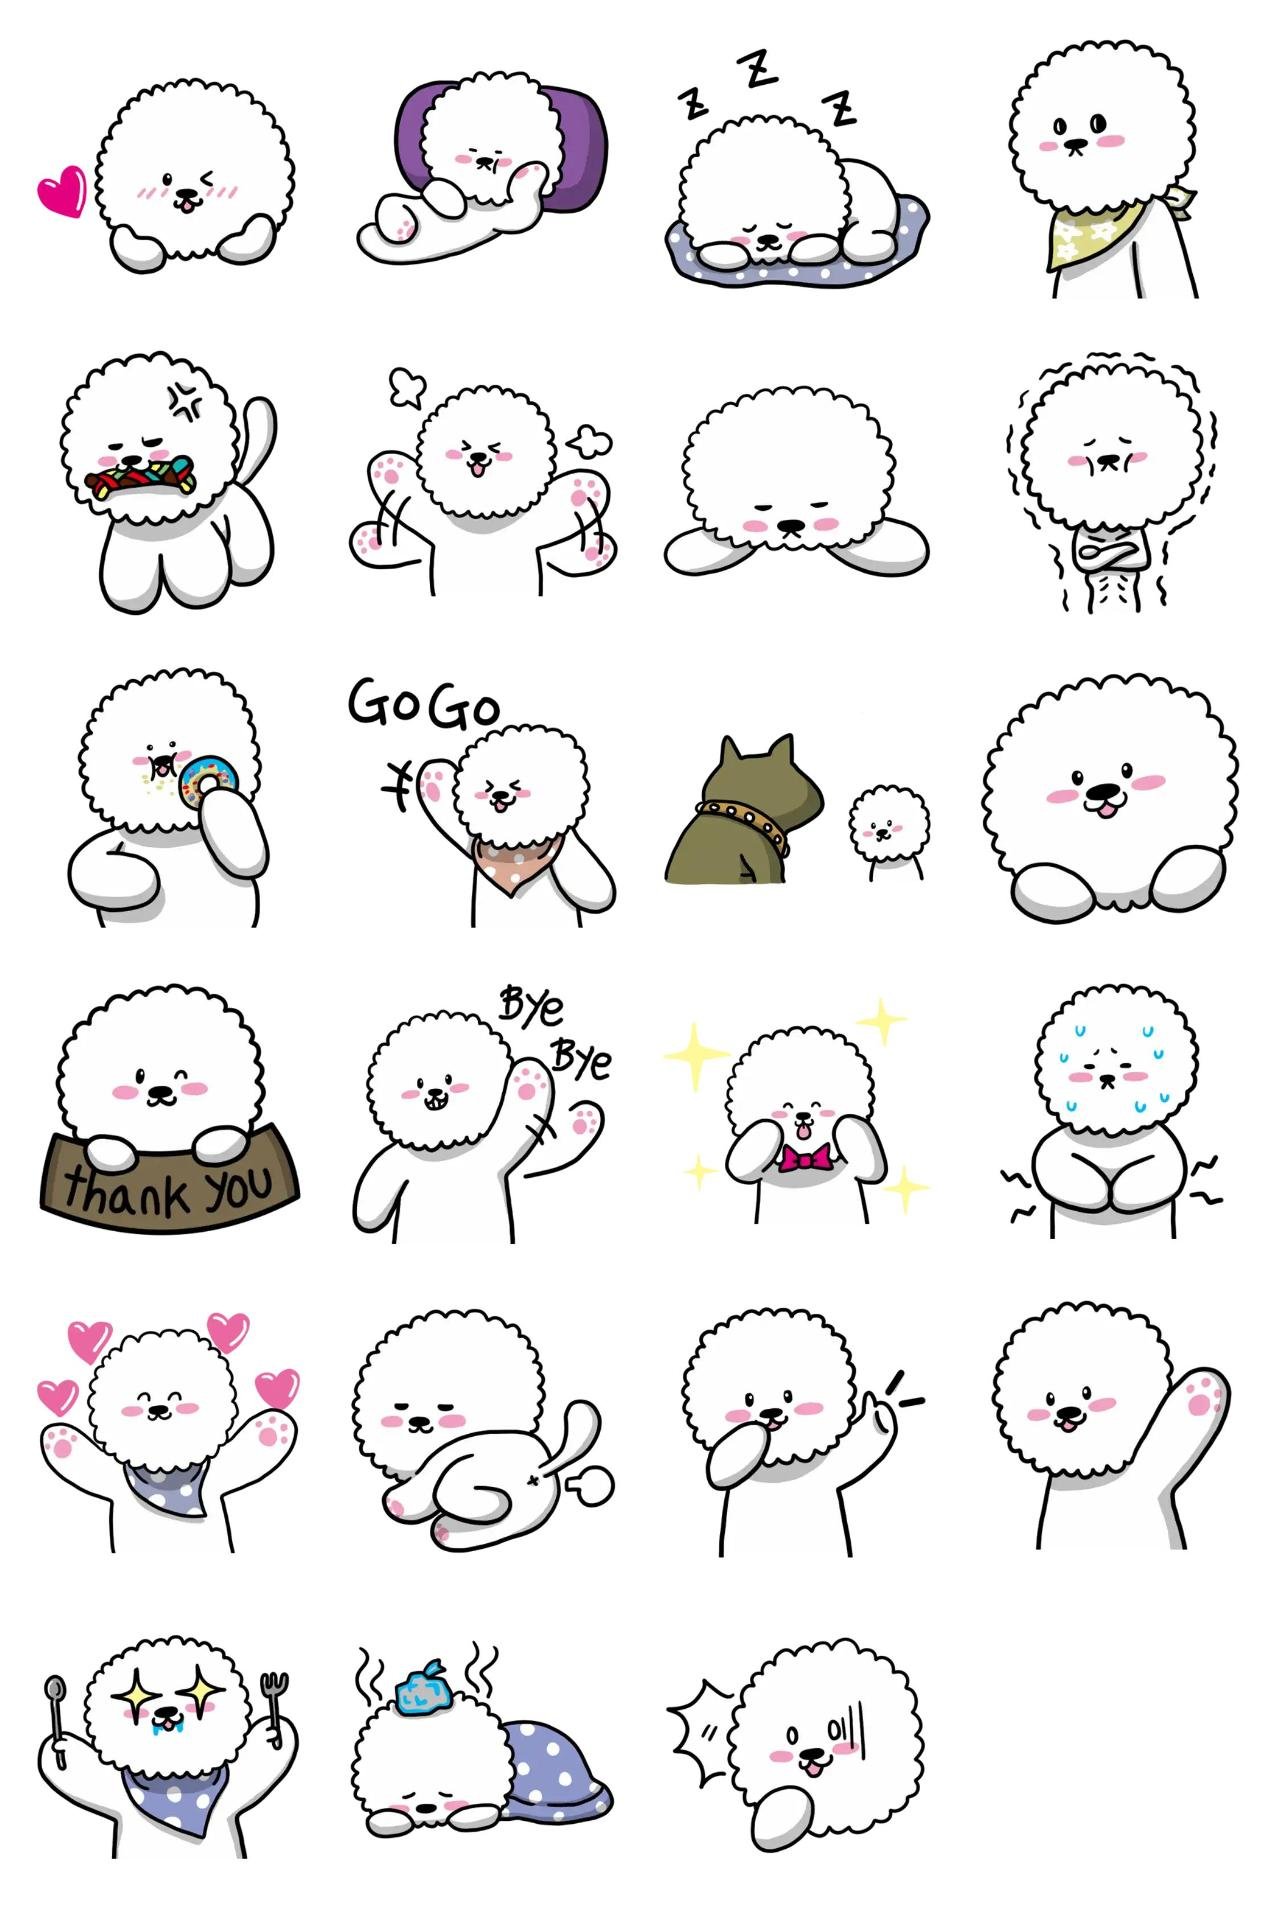 Mayo Cute Dog Bichon Frise Animation/Cartoon,Animals sticker pack for Whatsapp, Telegram, Signal, and others chatting and message apps